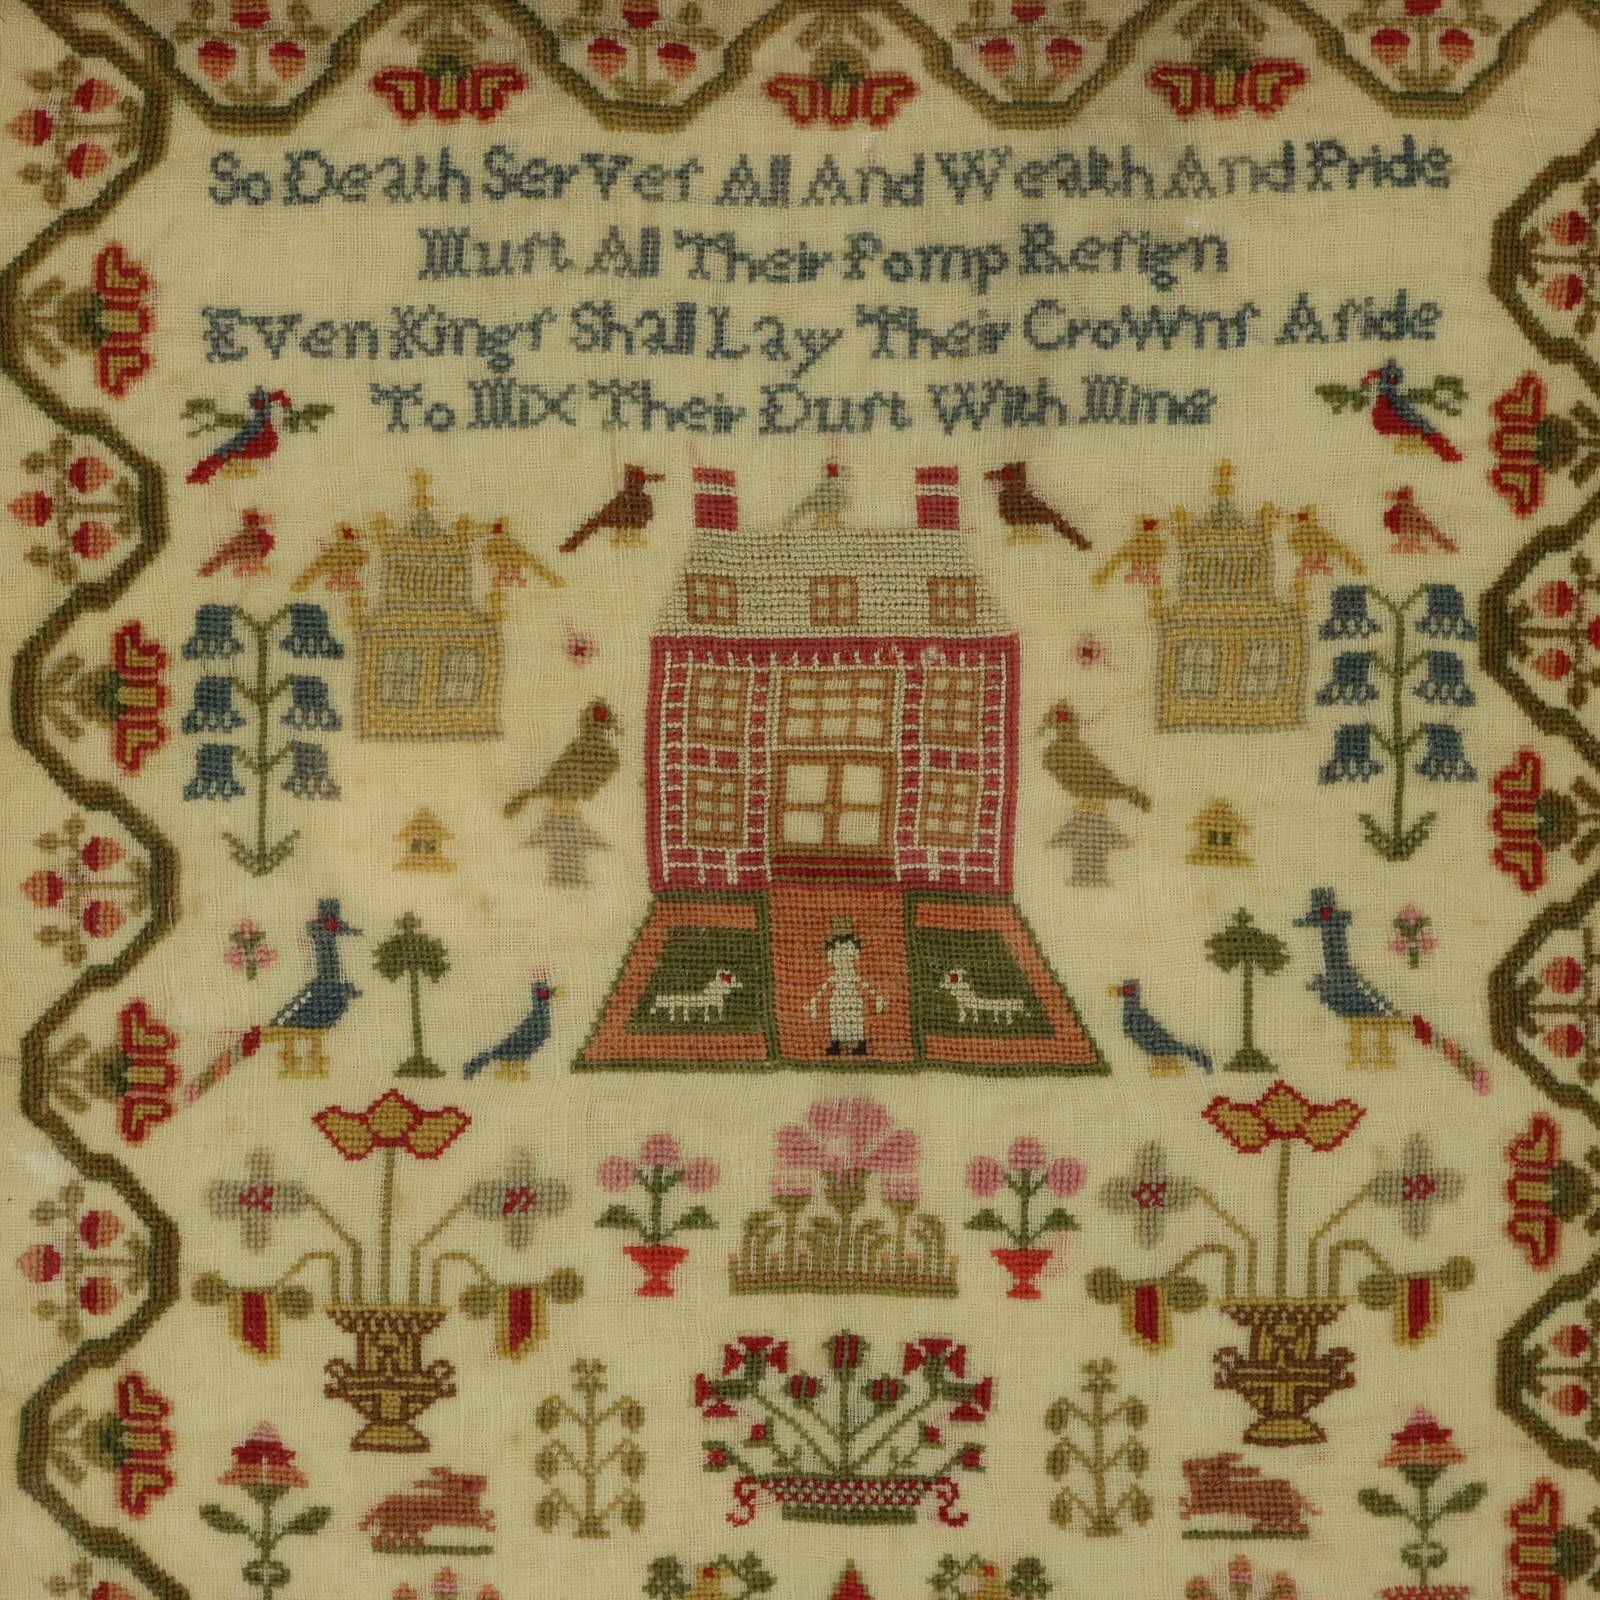 Regency period sampler, 1827, by Maria Curtis. The sampler is worked in fine wool and silk on linen ground, in cross stitch. Meandering floral strawberry border. Colours red, yellow, brown, silver, black, pink, green and blue. Verse reads, 'So Death